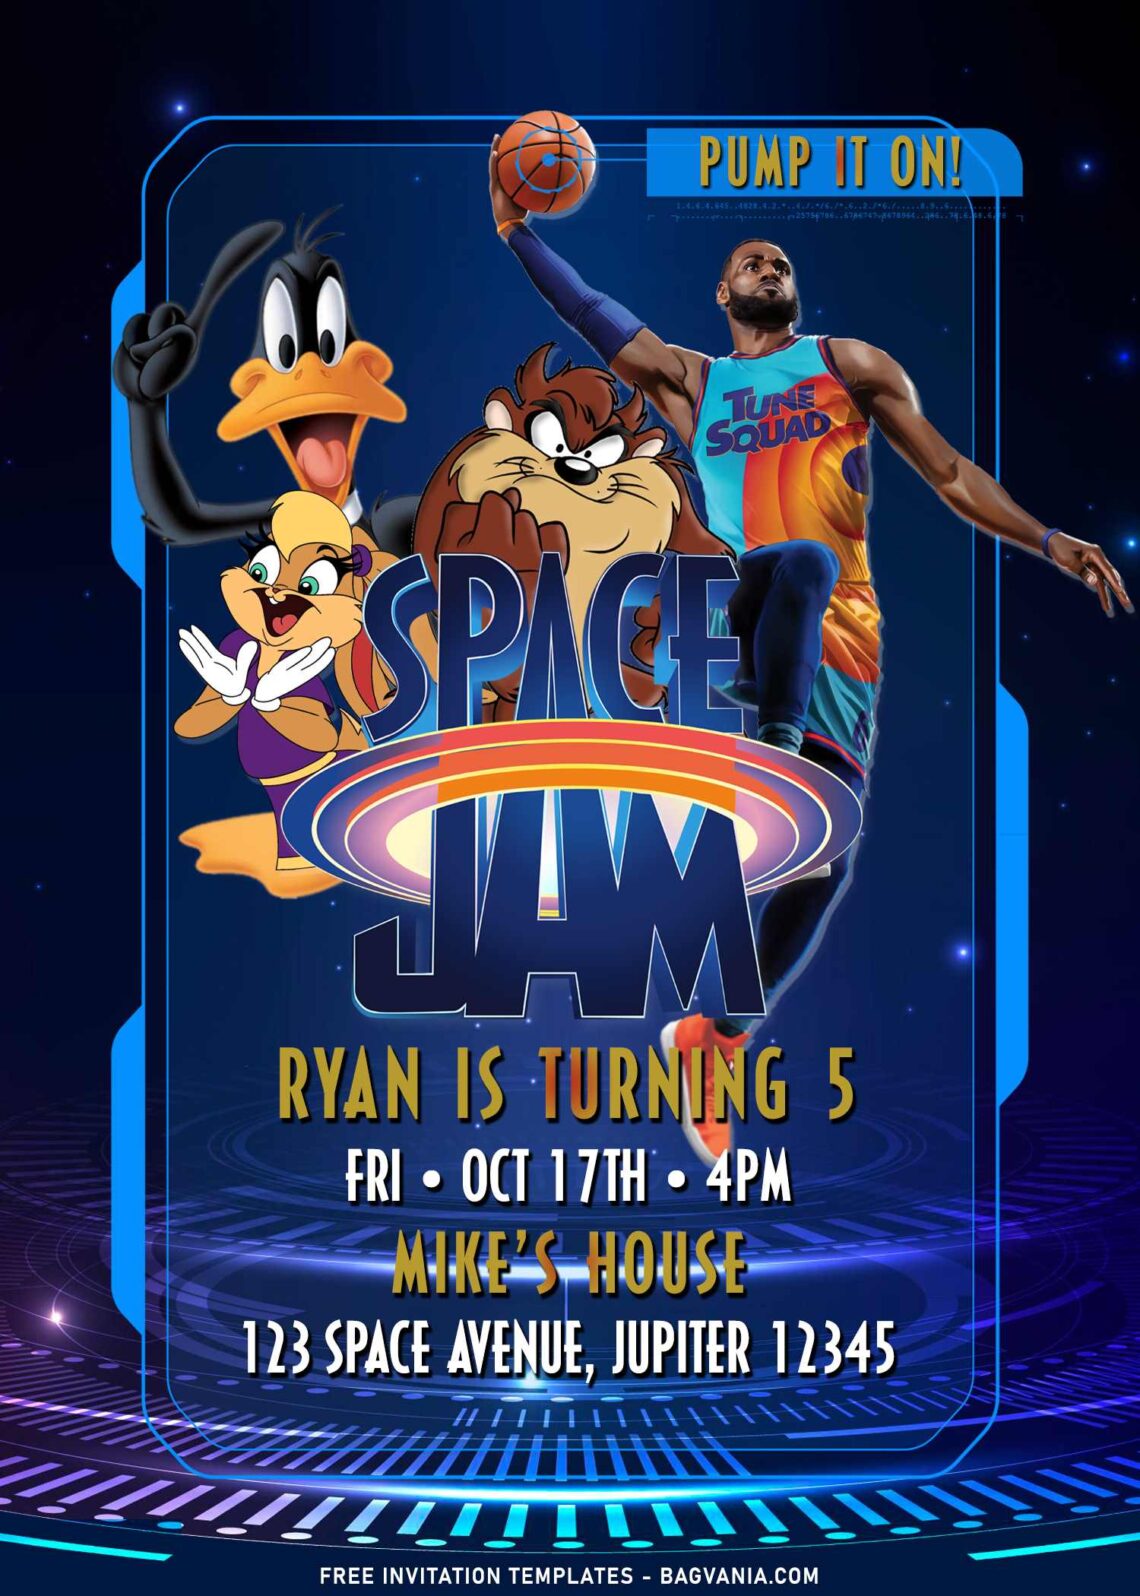 9+ Space Jam Birthday Invitation Templates For Kids Of All Ages FREE